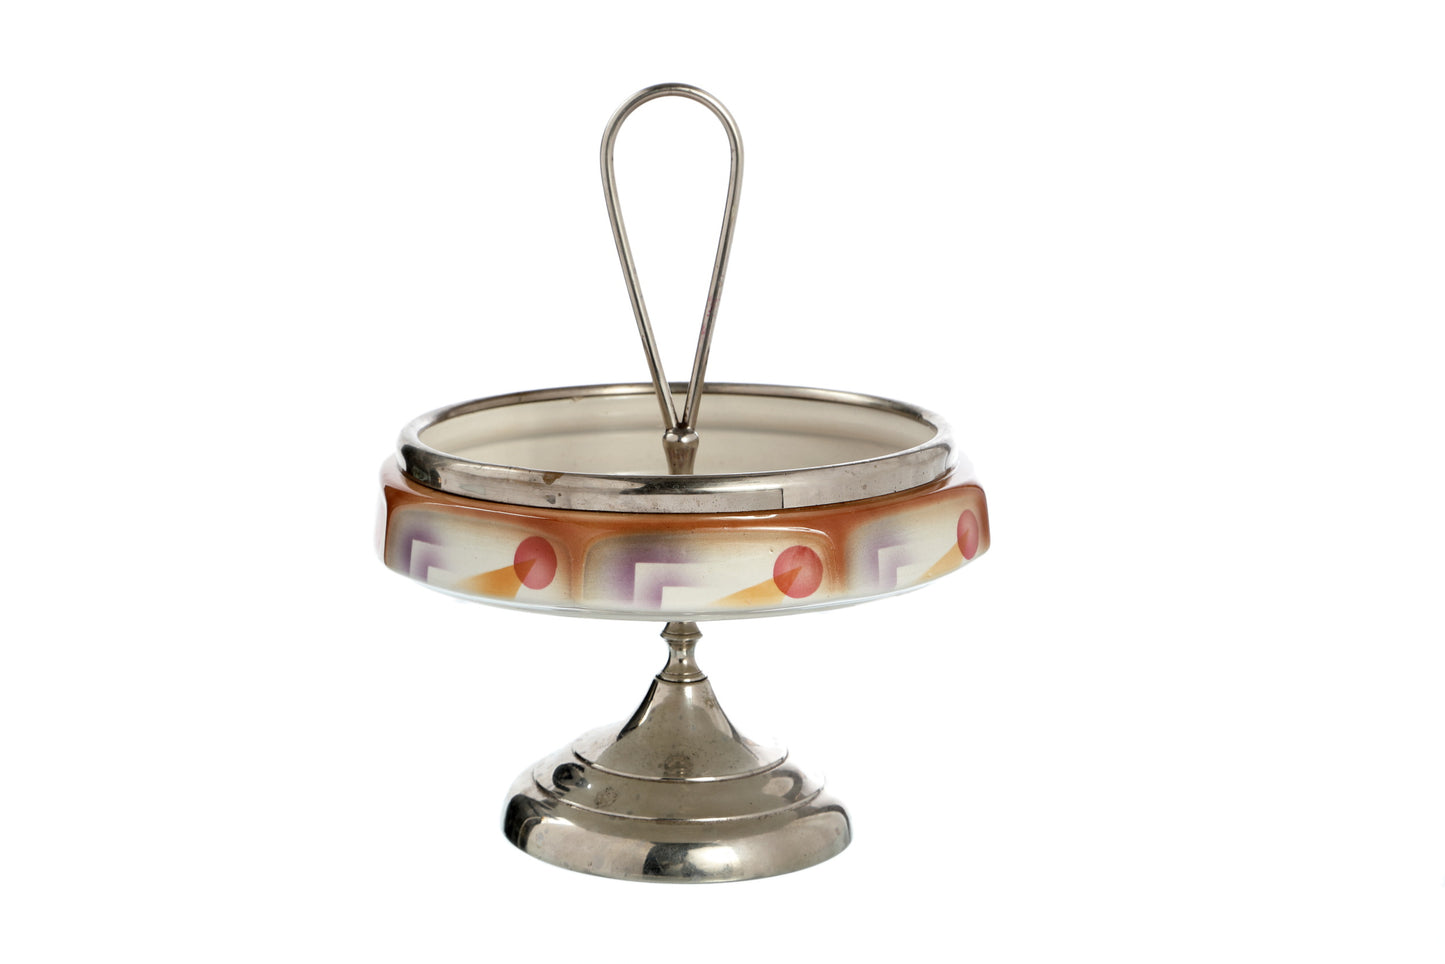 Futurist cake stand from the 1930s